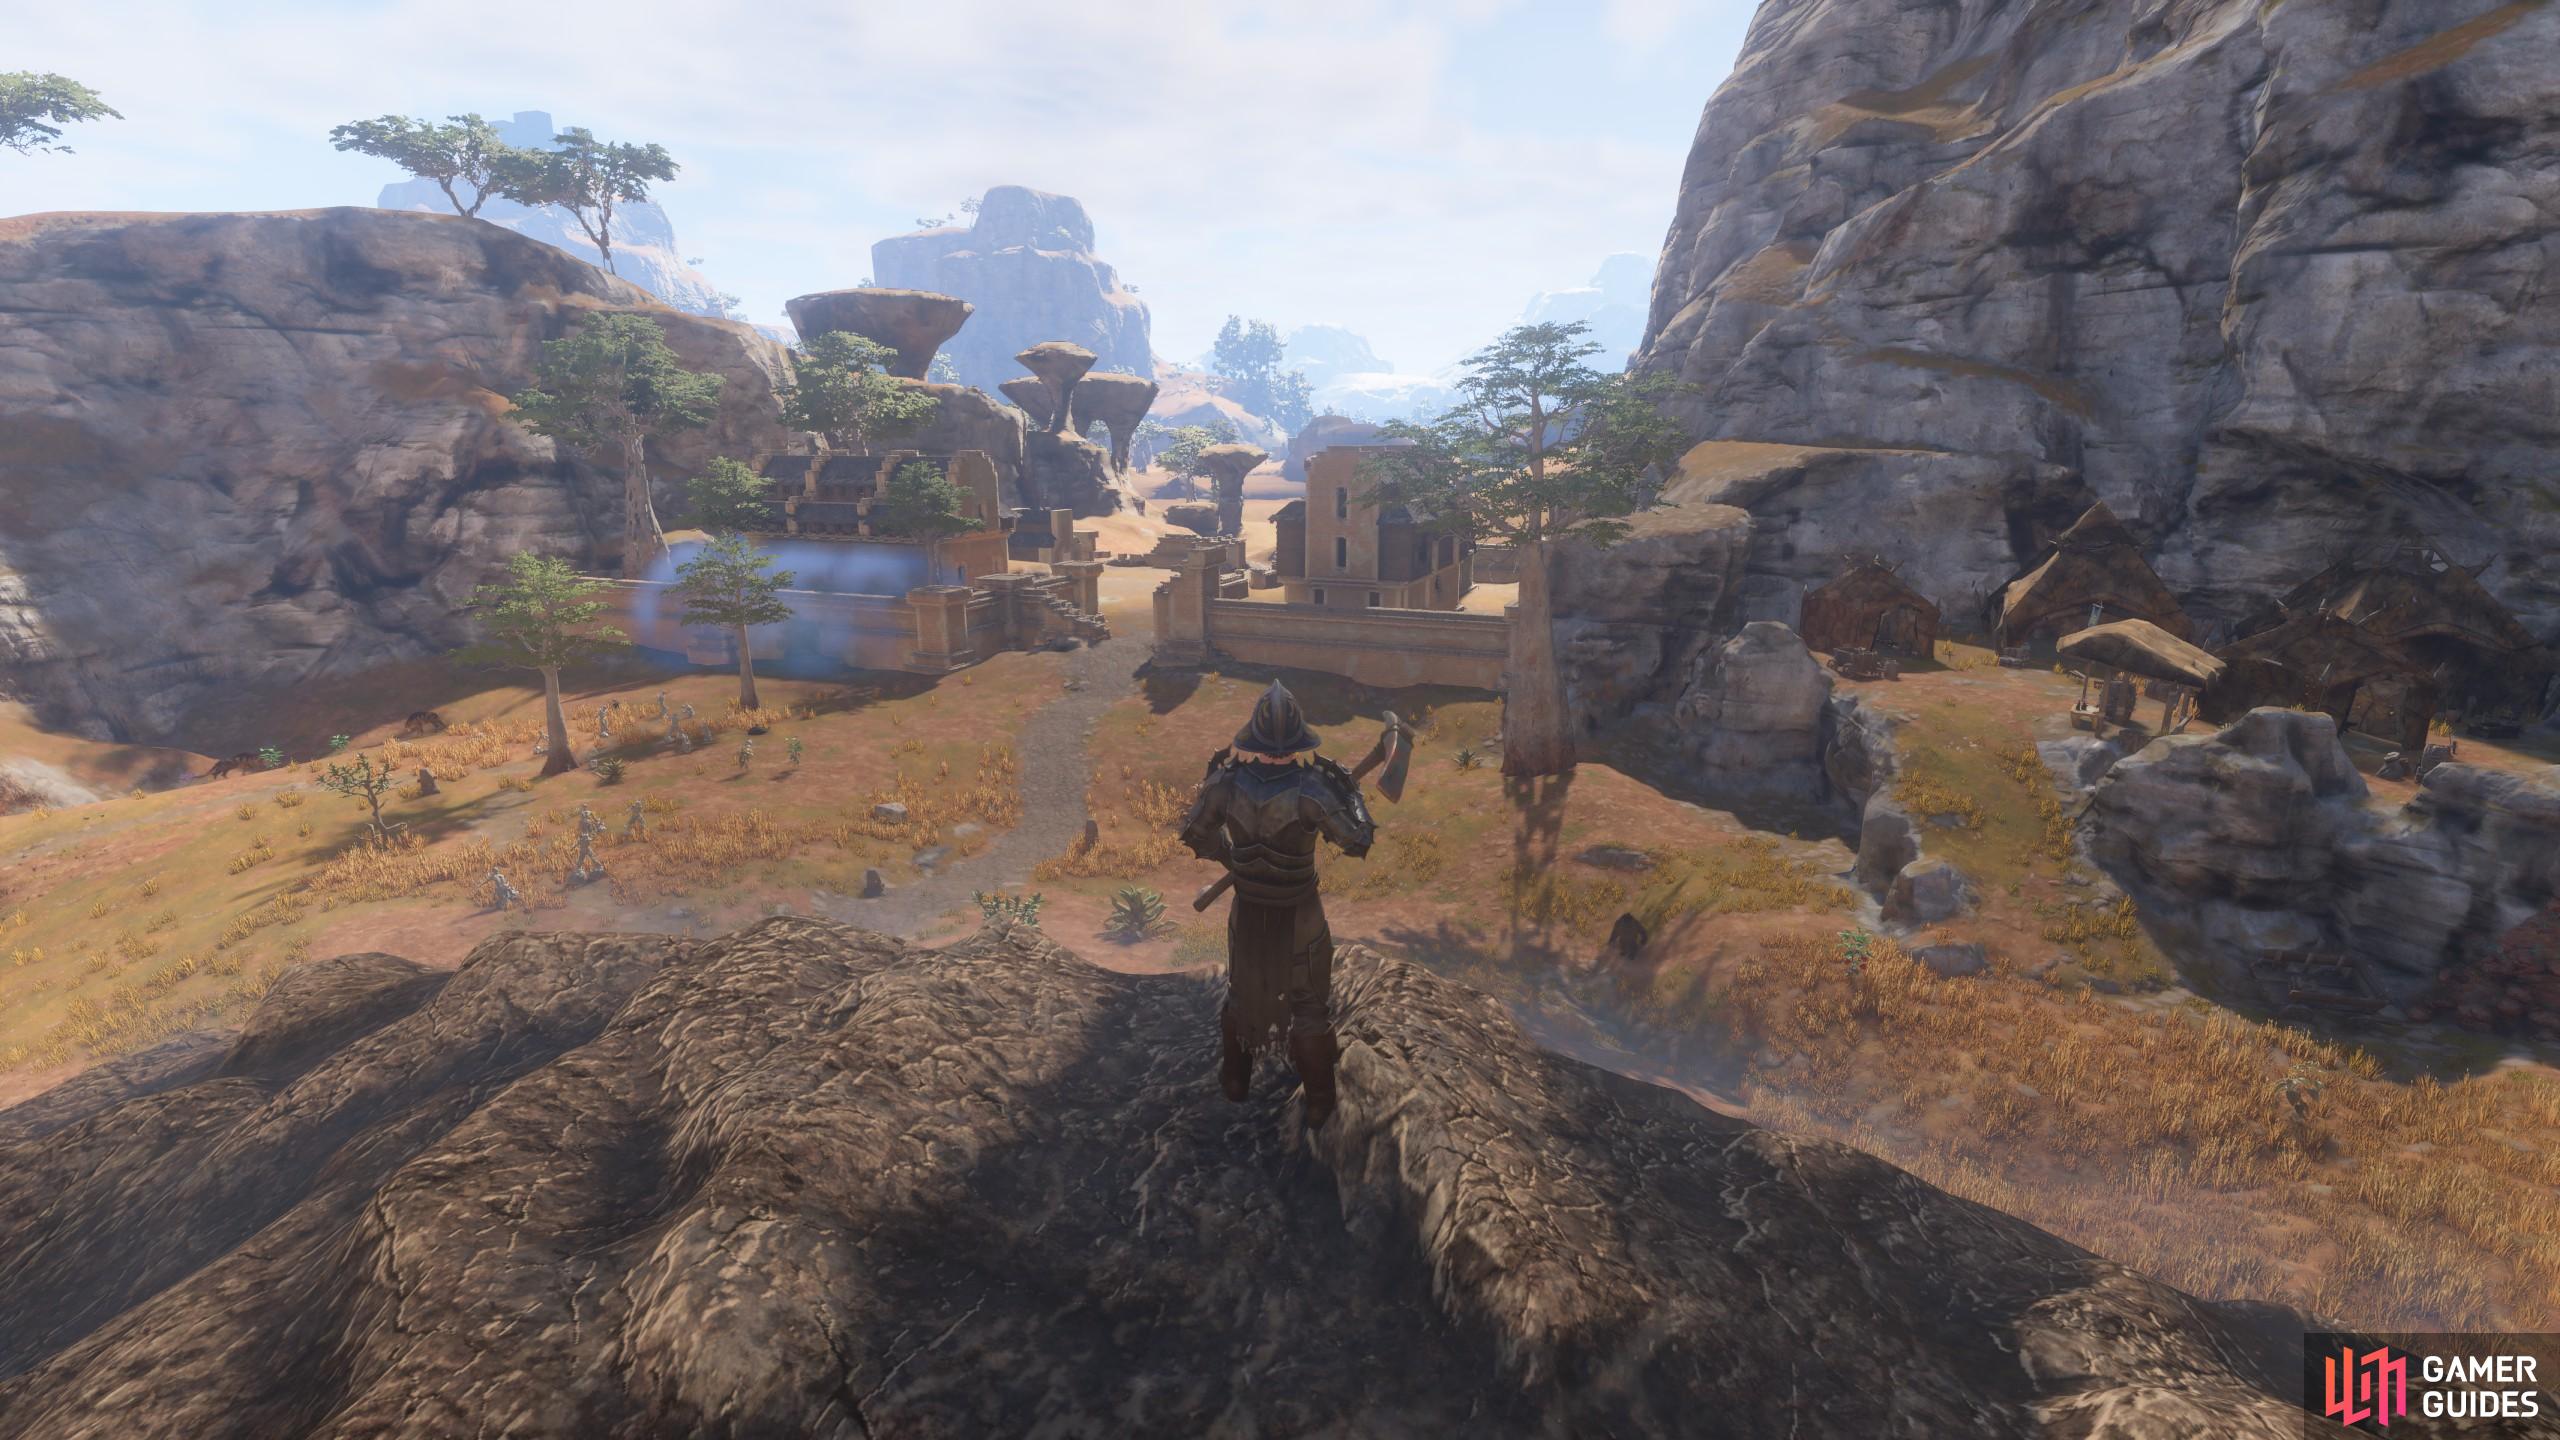 The Nomad Highlands is the stop gap to the desert biome, with crafting quests and plenty of new resources to find and gain to progress your Flame Level and mid to late-game crafting requirements.